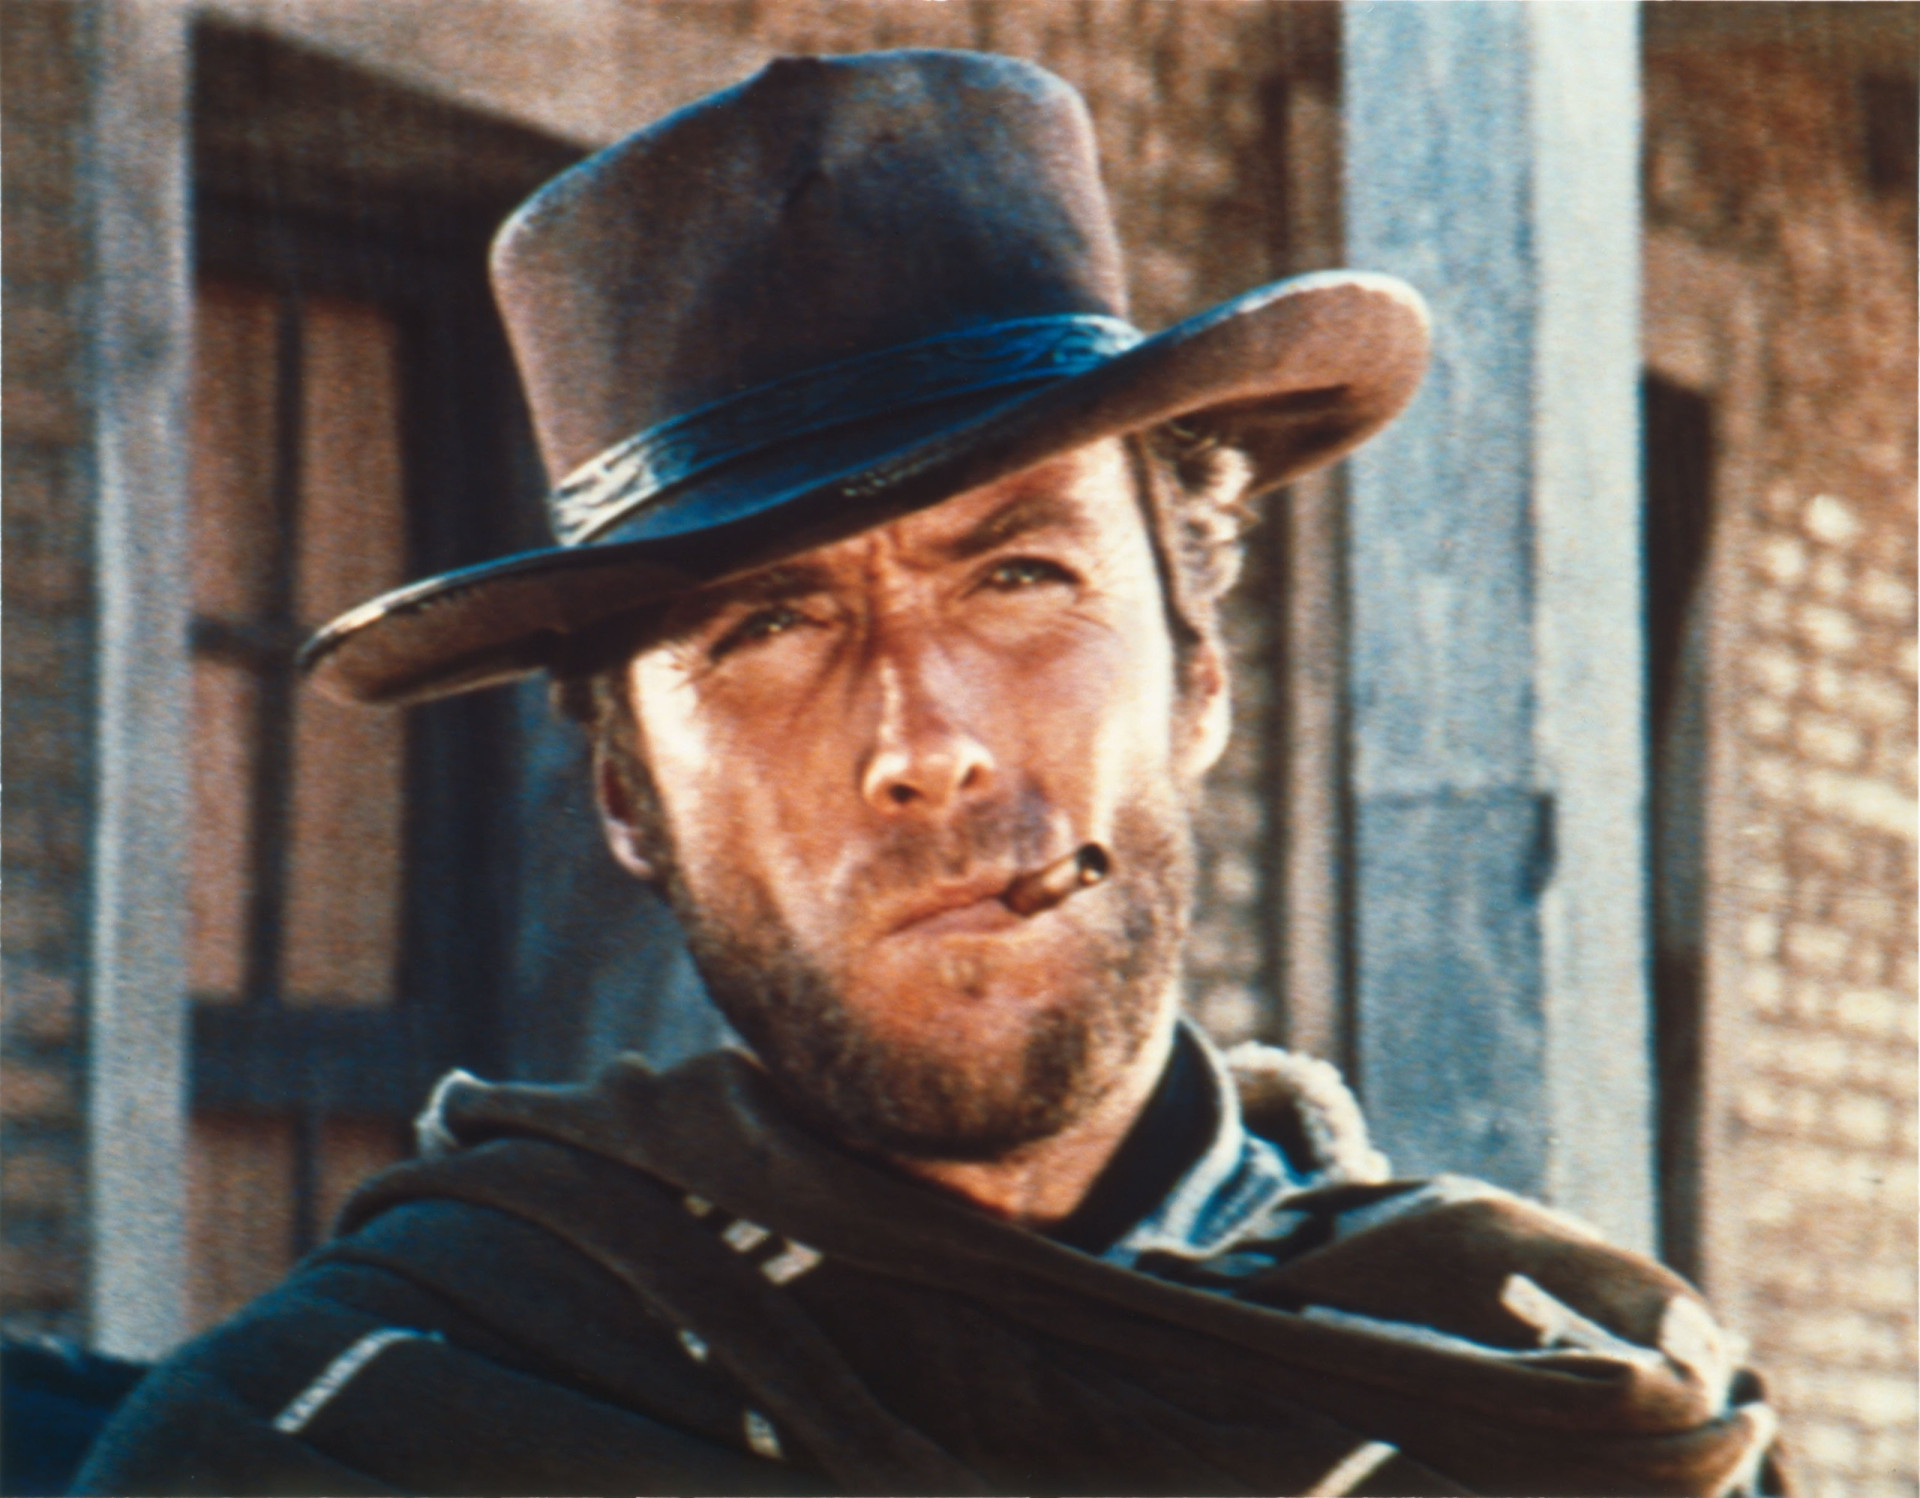 <p>The set was built in 1964 for 'A Fistful of Dollars,' the famous "Spaghetti Western" starring Clint Eastwood.</p><p><a href="https://www.msn.com/en-us/community/channel/vid-7xx8mnucu55yw63we9va2gwr7uihbxwc68fxqp25x6tg4ftibpra?cvid=94631541bc0f4f89bfd59158d696ad7e">Follow us and access great exclusive content every day</a></p>